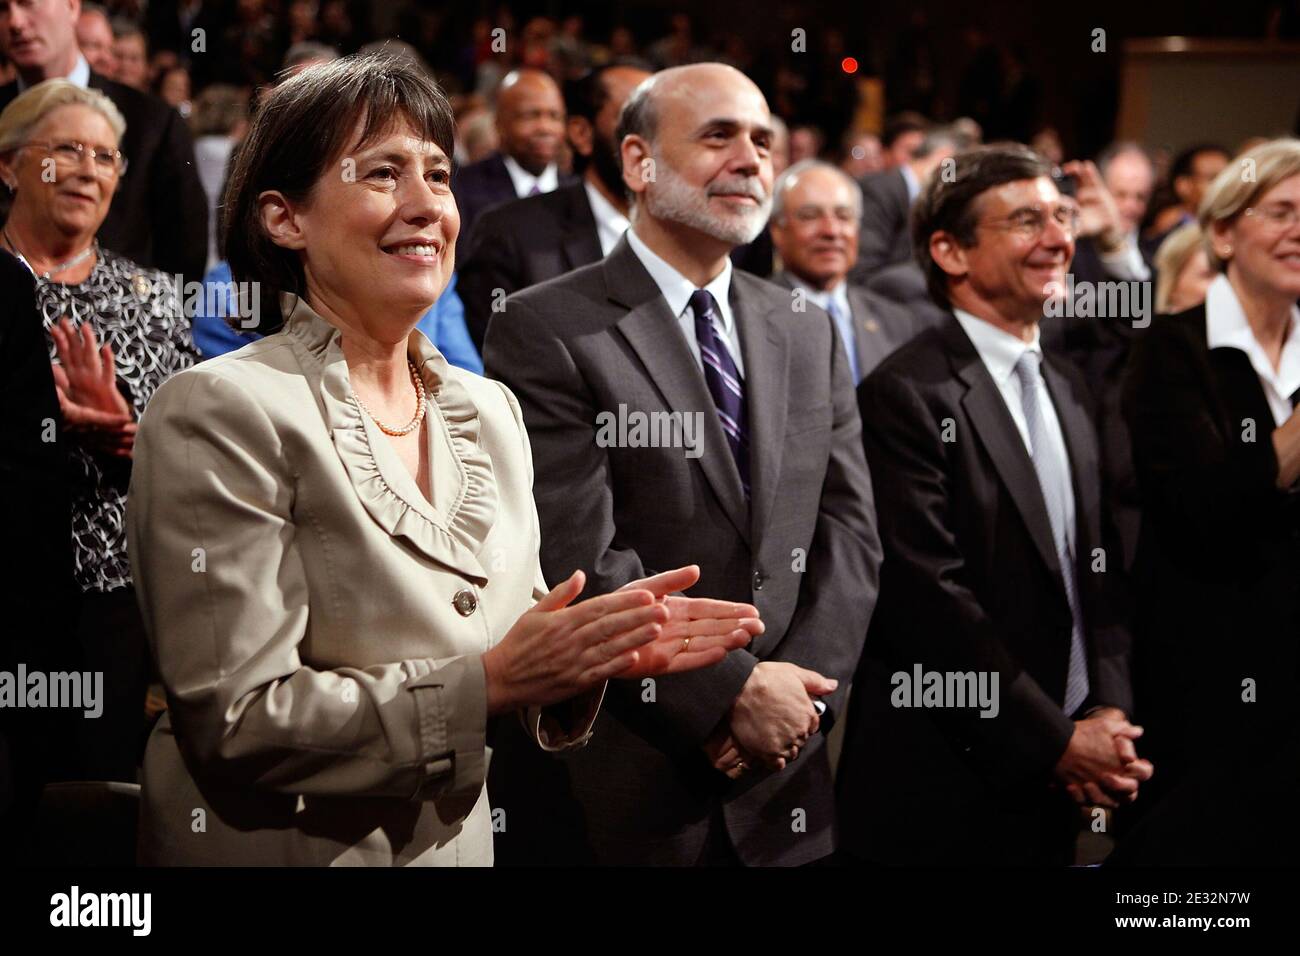 'FDIC Chair Sheila Bair (2nd L) and Federal Reserve Bank Chairman Ben Bernanke (C) look on after U.S. President Barack Obama signed the the financial reform bill into law during a ceremony at the Ronald Reagan Building and International Trade Center July 21, 2010 in Washington, DC. A sweeping expansion of federal financial regulation in the wake of the worst recession since the Great Depression, the bill will create a consumer protection agency, lay out a blueprint for disassembling financial entities considered ''too big to fail,'' and many other reforms. Photo by Chip Somodevilla/ABACAPRESS. Stock Photo